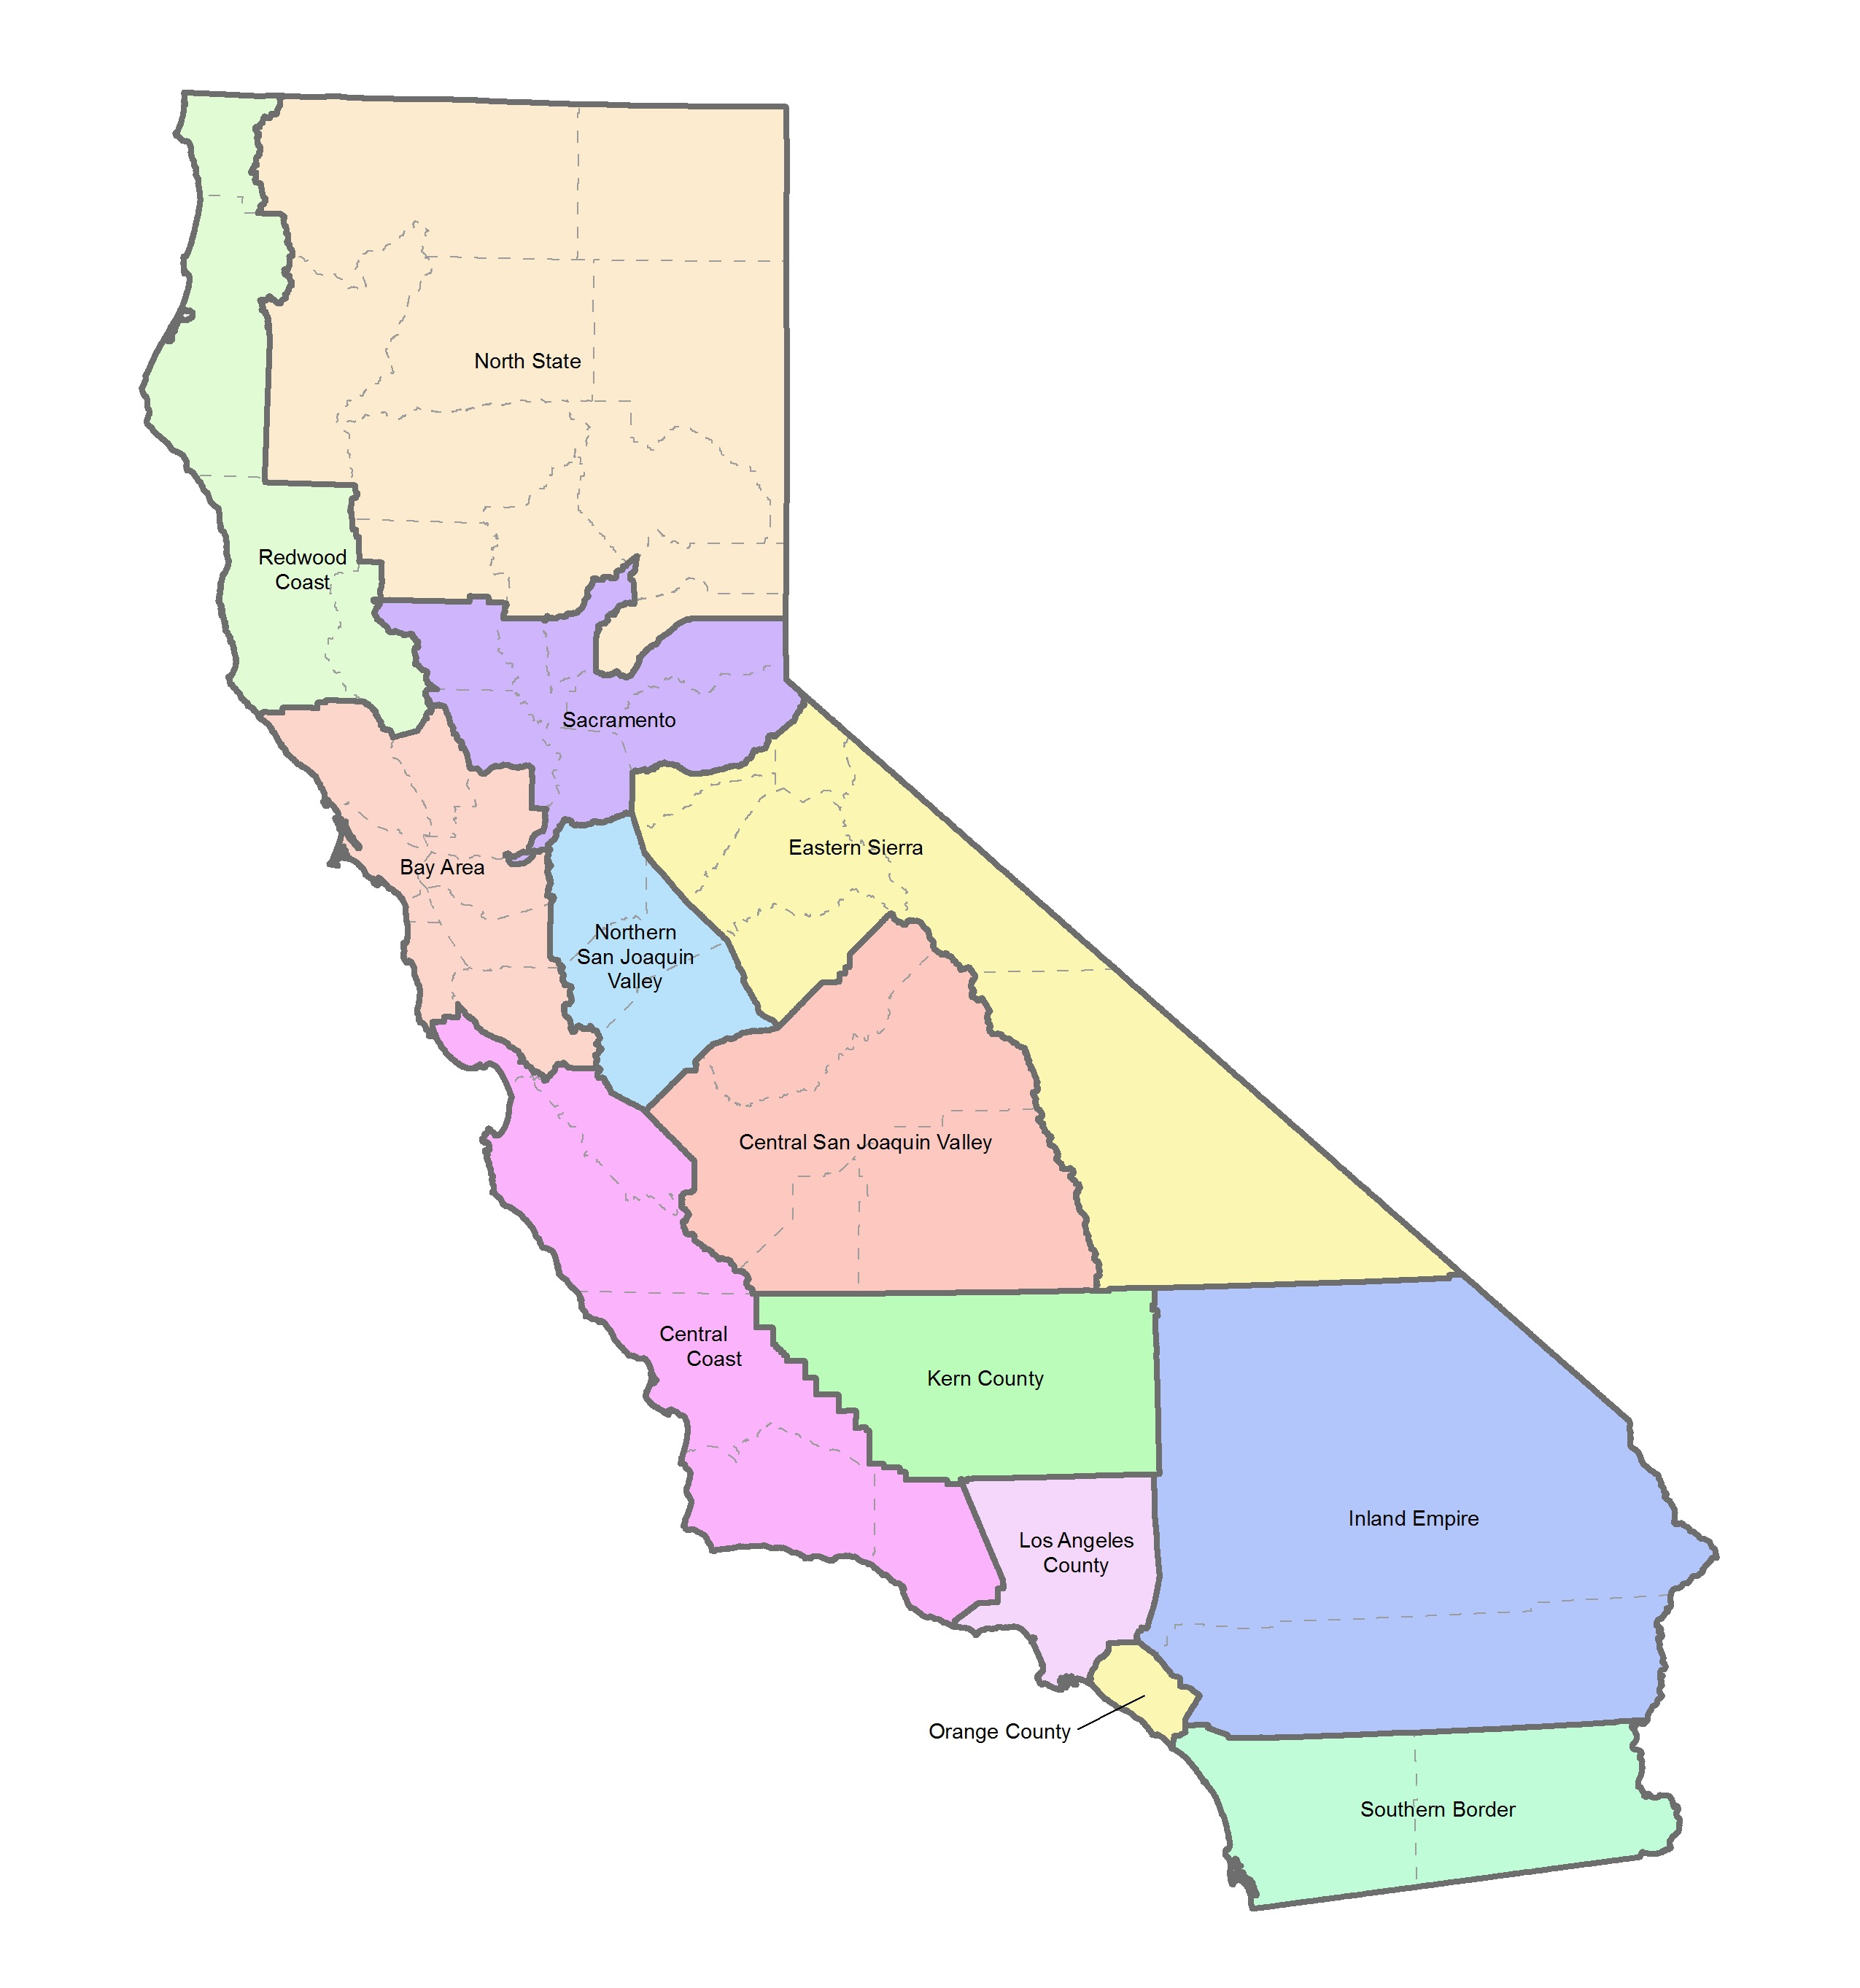 Graphic showing California Map with the following regions: North State, Redwood Coast, Sacramento, Bay Area, Northern San Joaquin Valley, Eastern Sierra, Central San Joaquin Valley, Central Coast, Kern County, Inland Empire, Los Angeles County, Orange County, and Southern Border